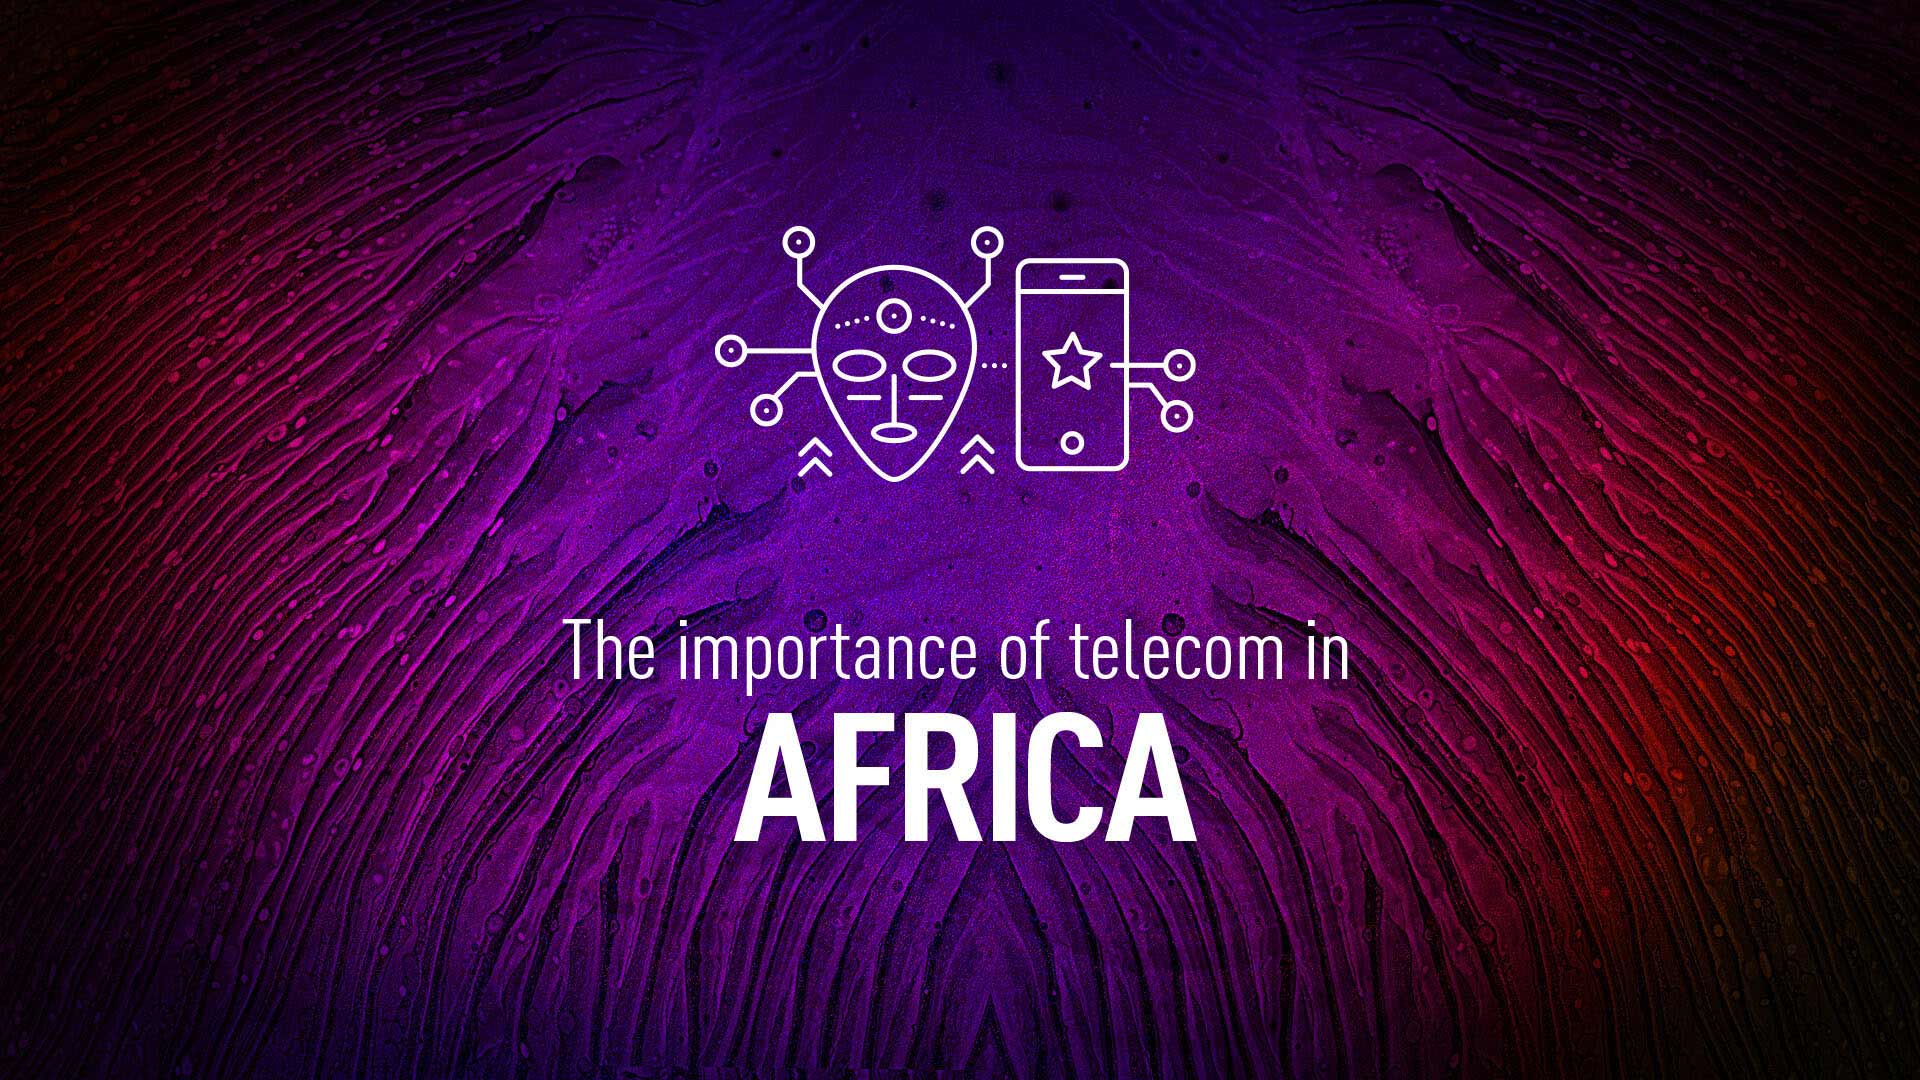 The importance of telecom in Africa